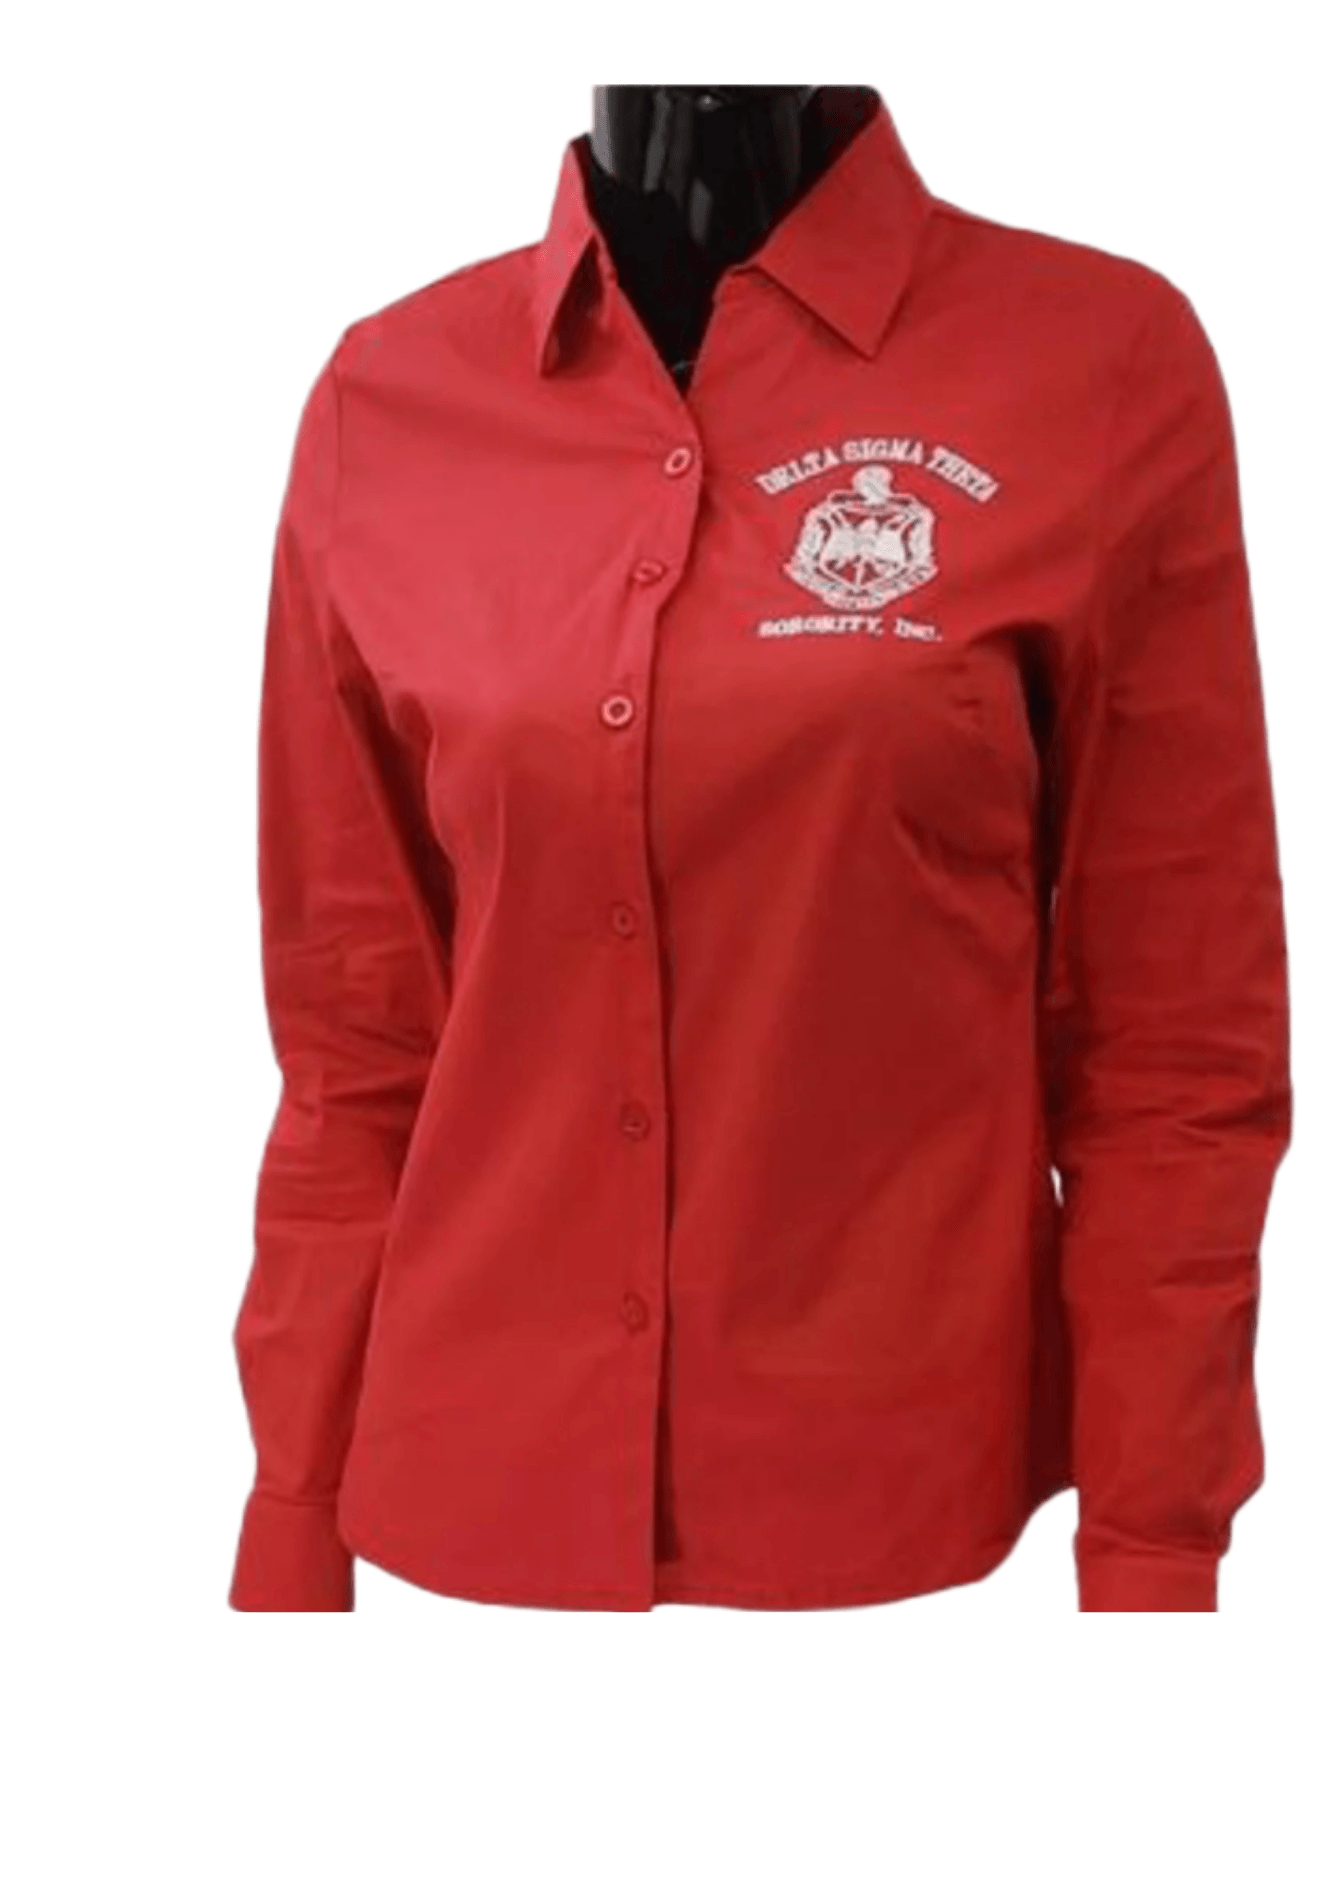 Delta Sigma Theta Sorority, Inc. button down collar shirt with Sorority Crest. Offered in Red or Black 